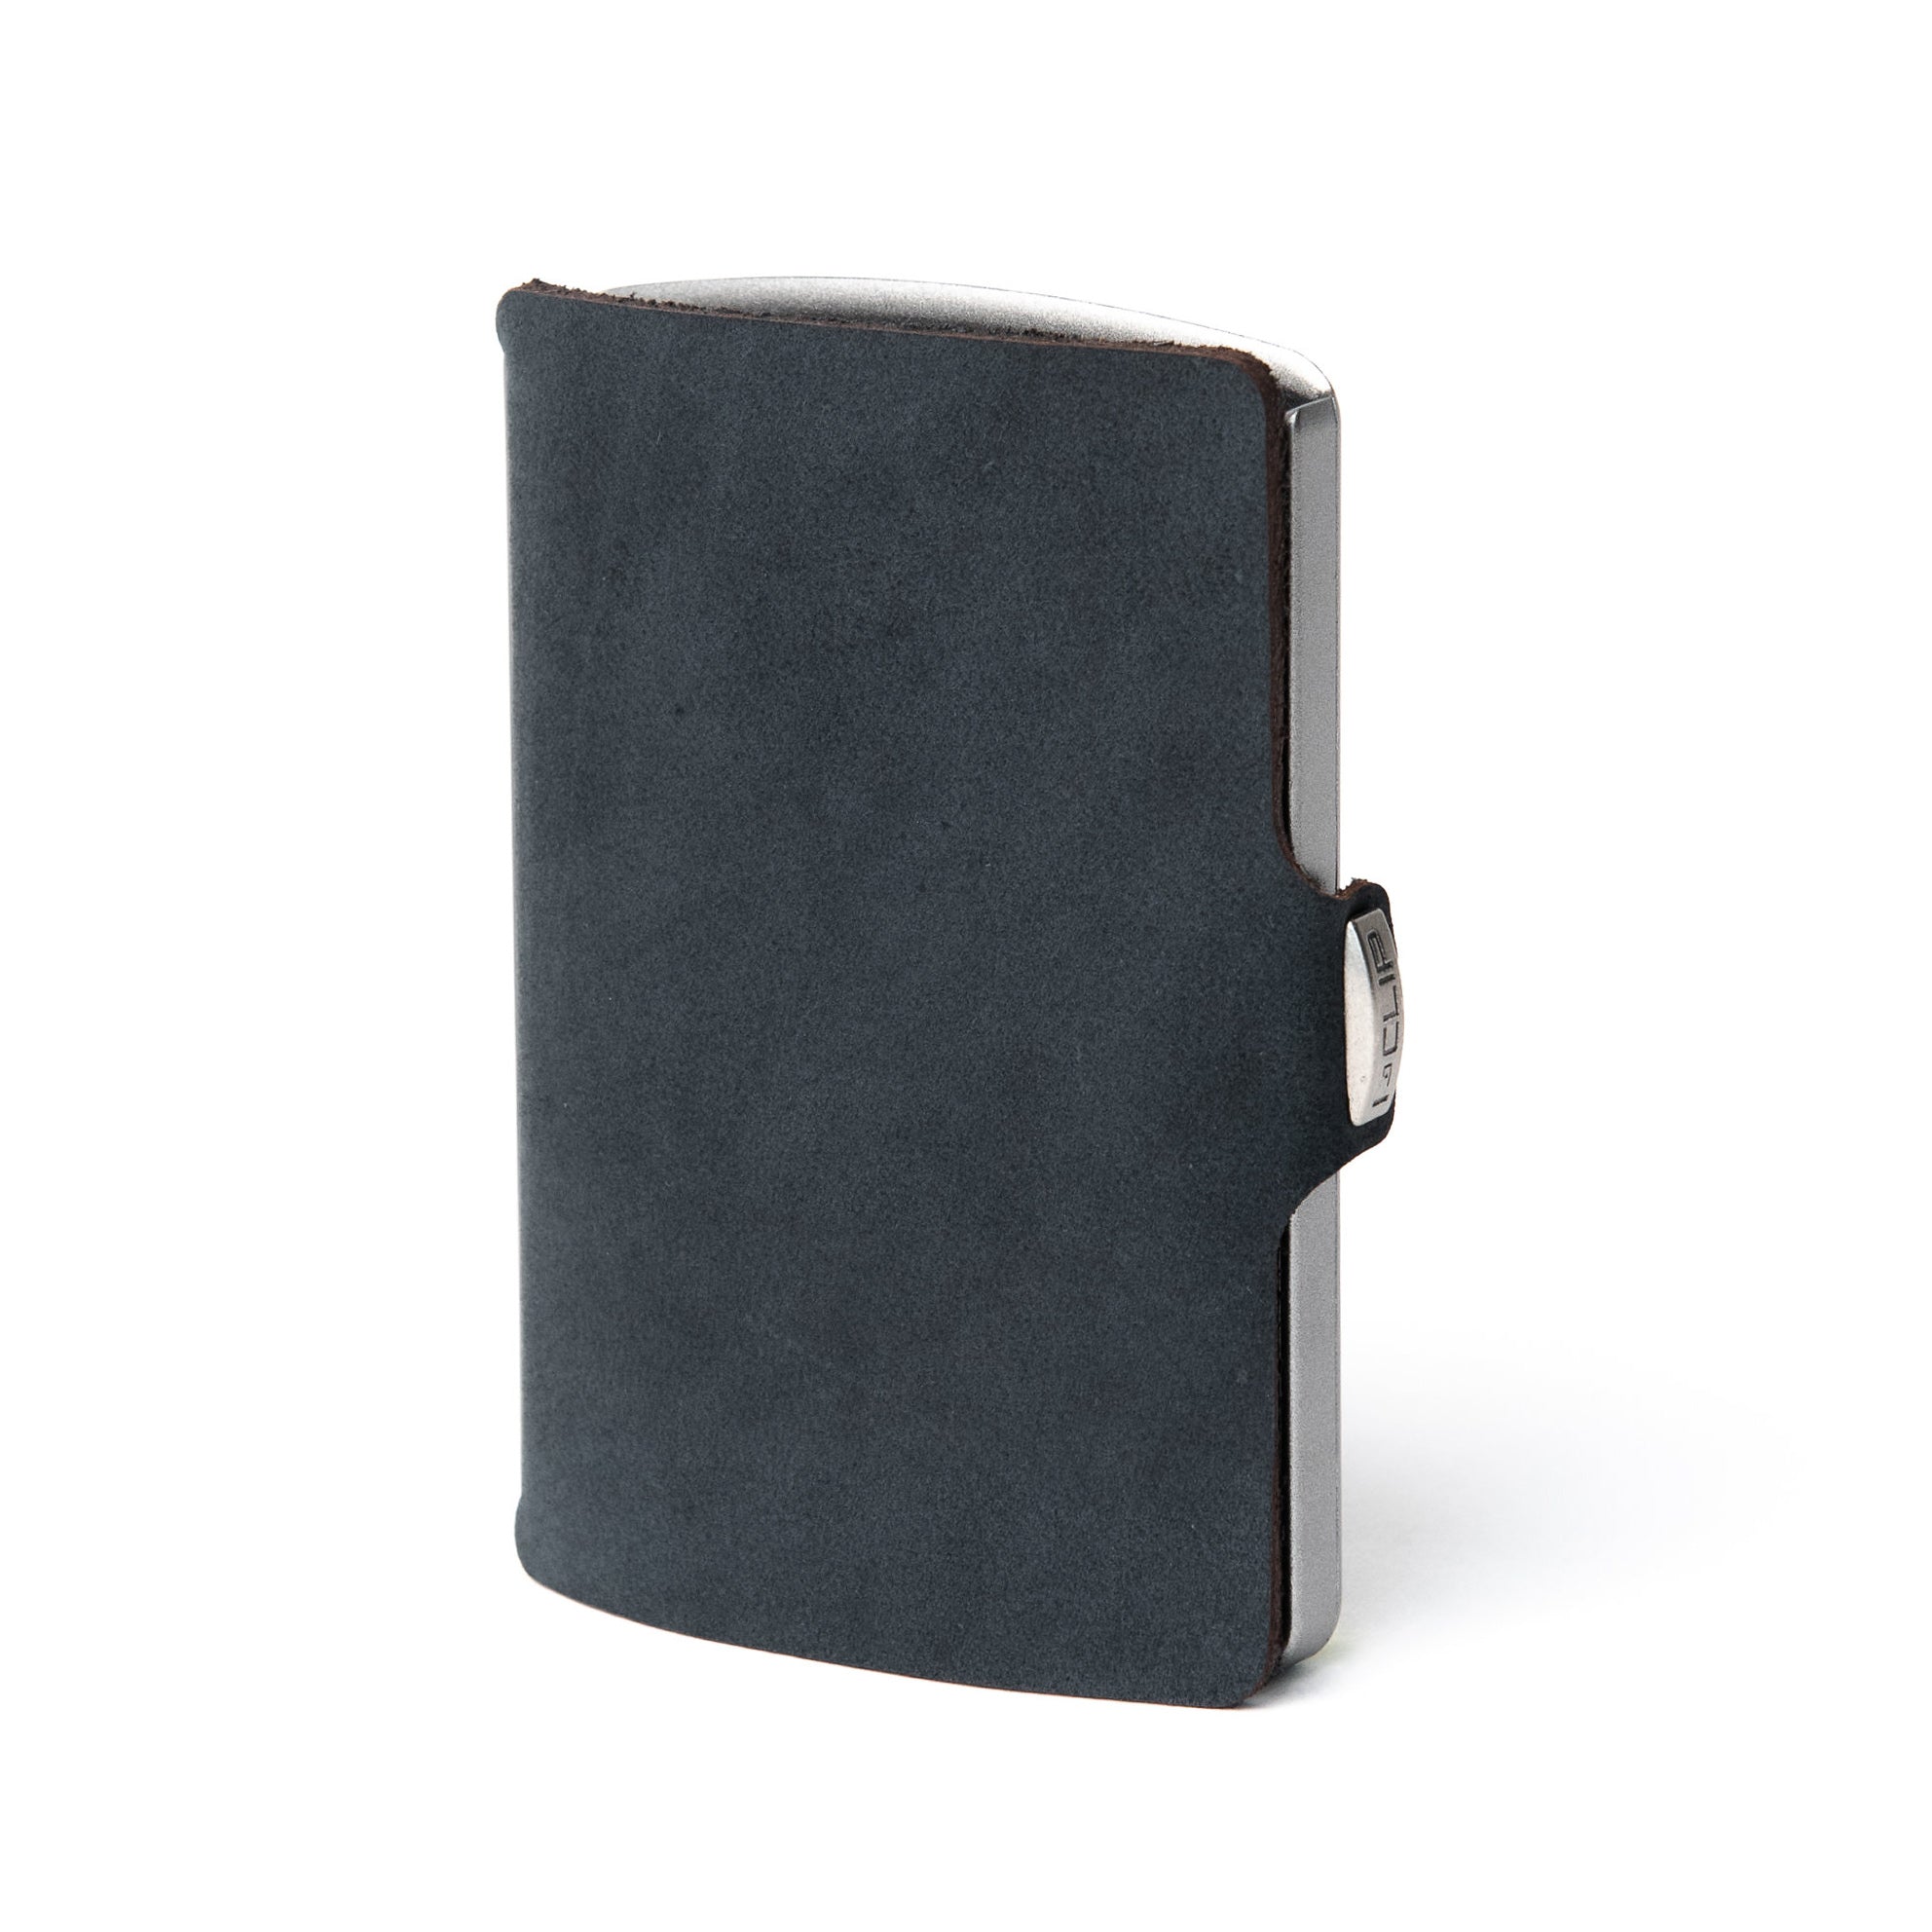 Soft Touch Leather - Black / Metallic Gray Frame - I-CLIP 